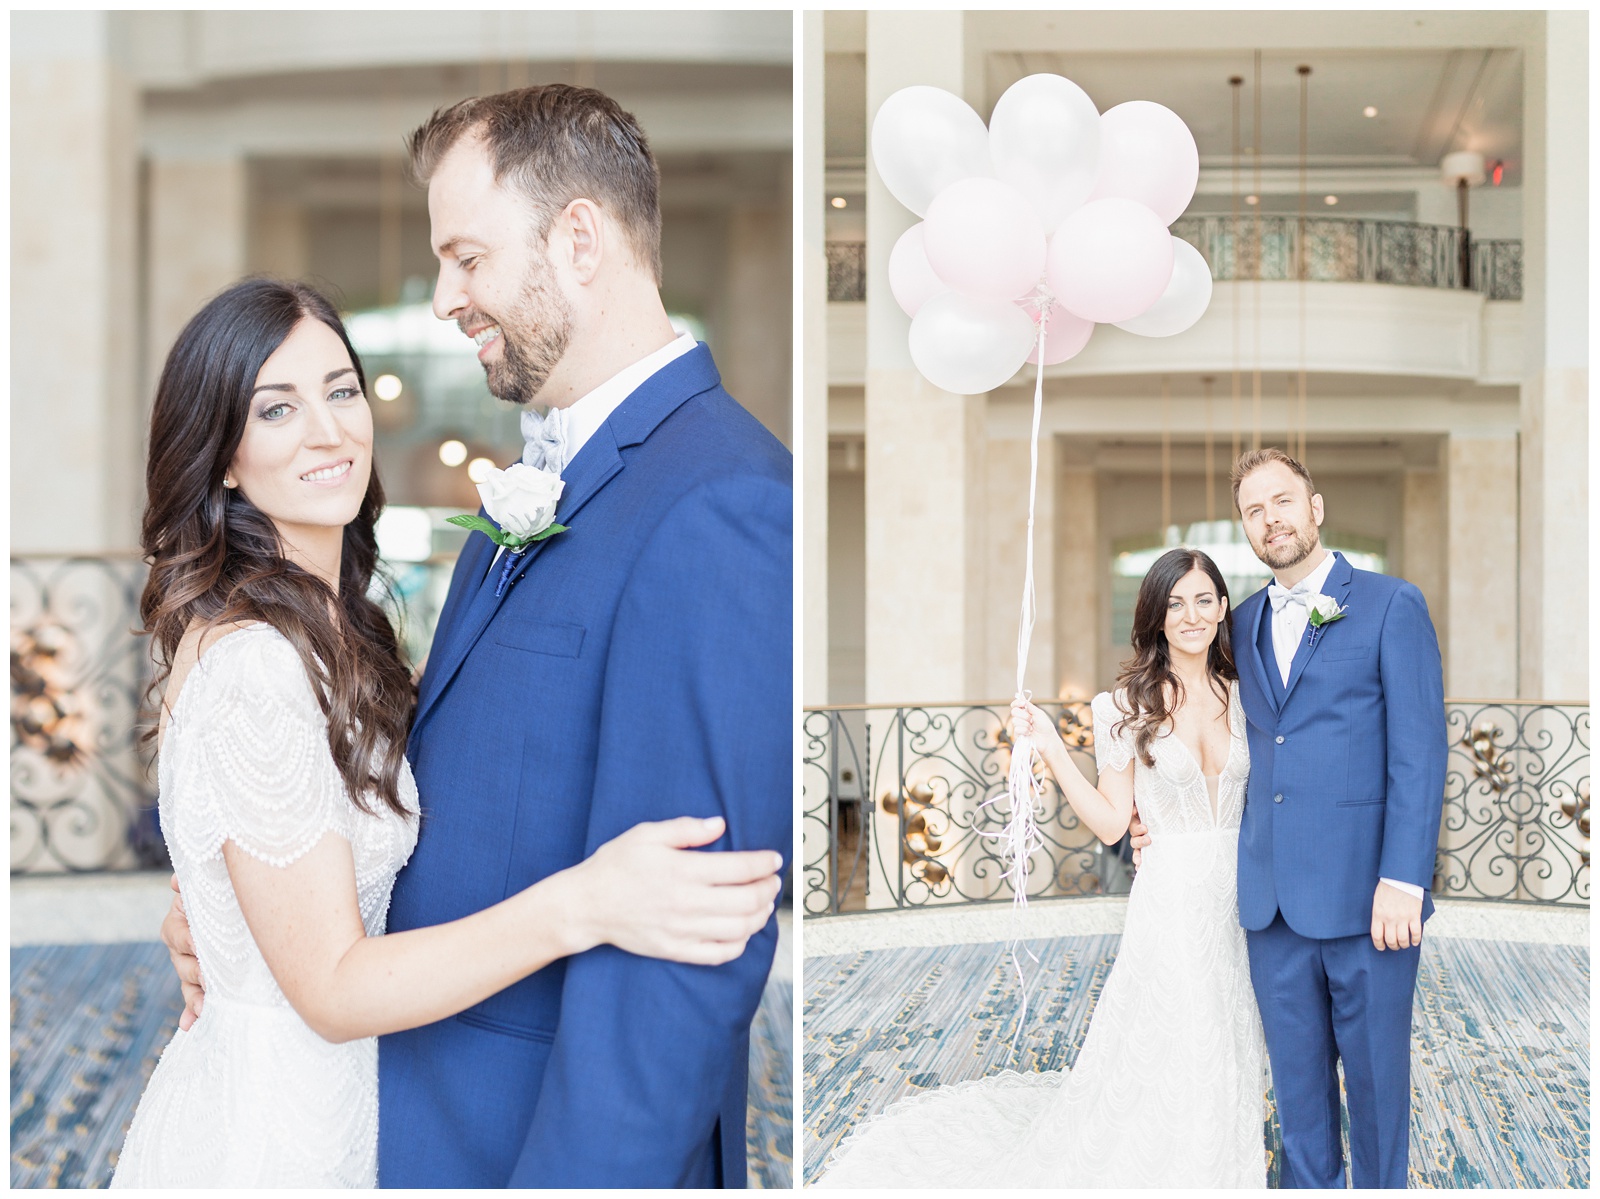 Bride and groom portraits at Tampa Waterside Hotel | Matlock and Kelly Photography